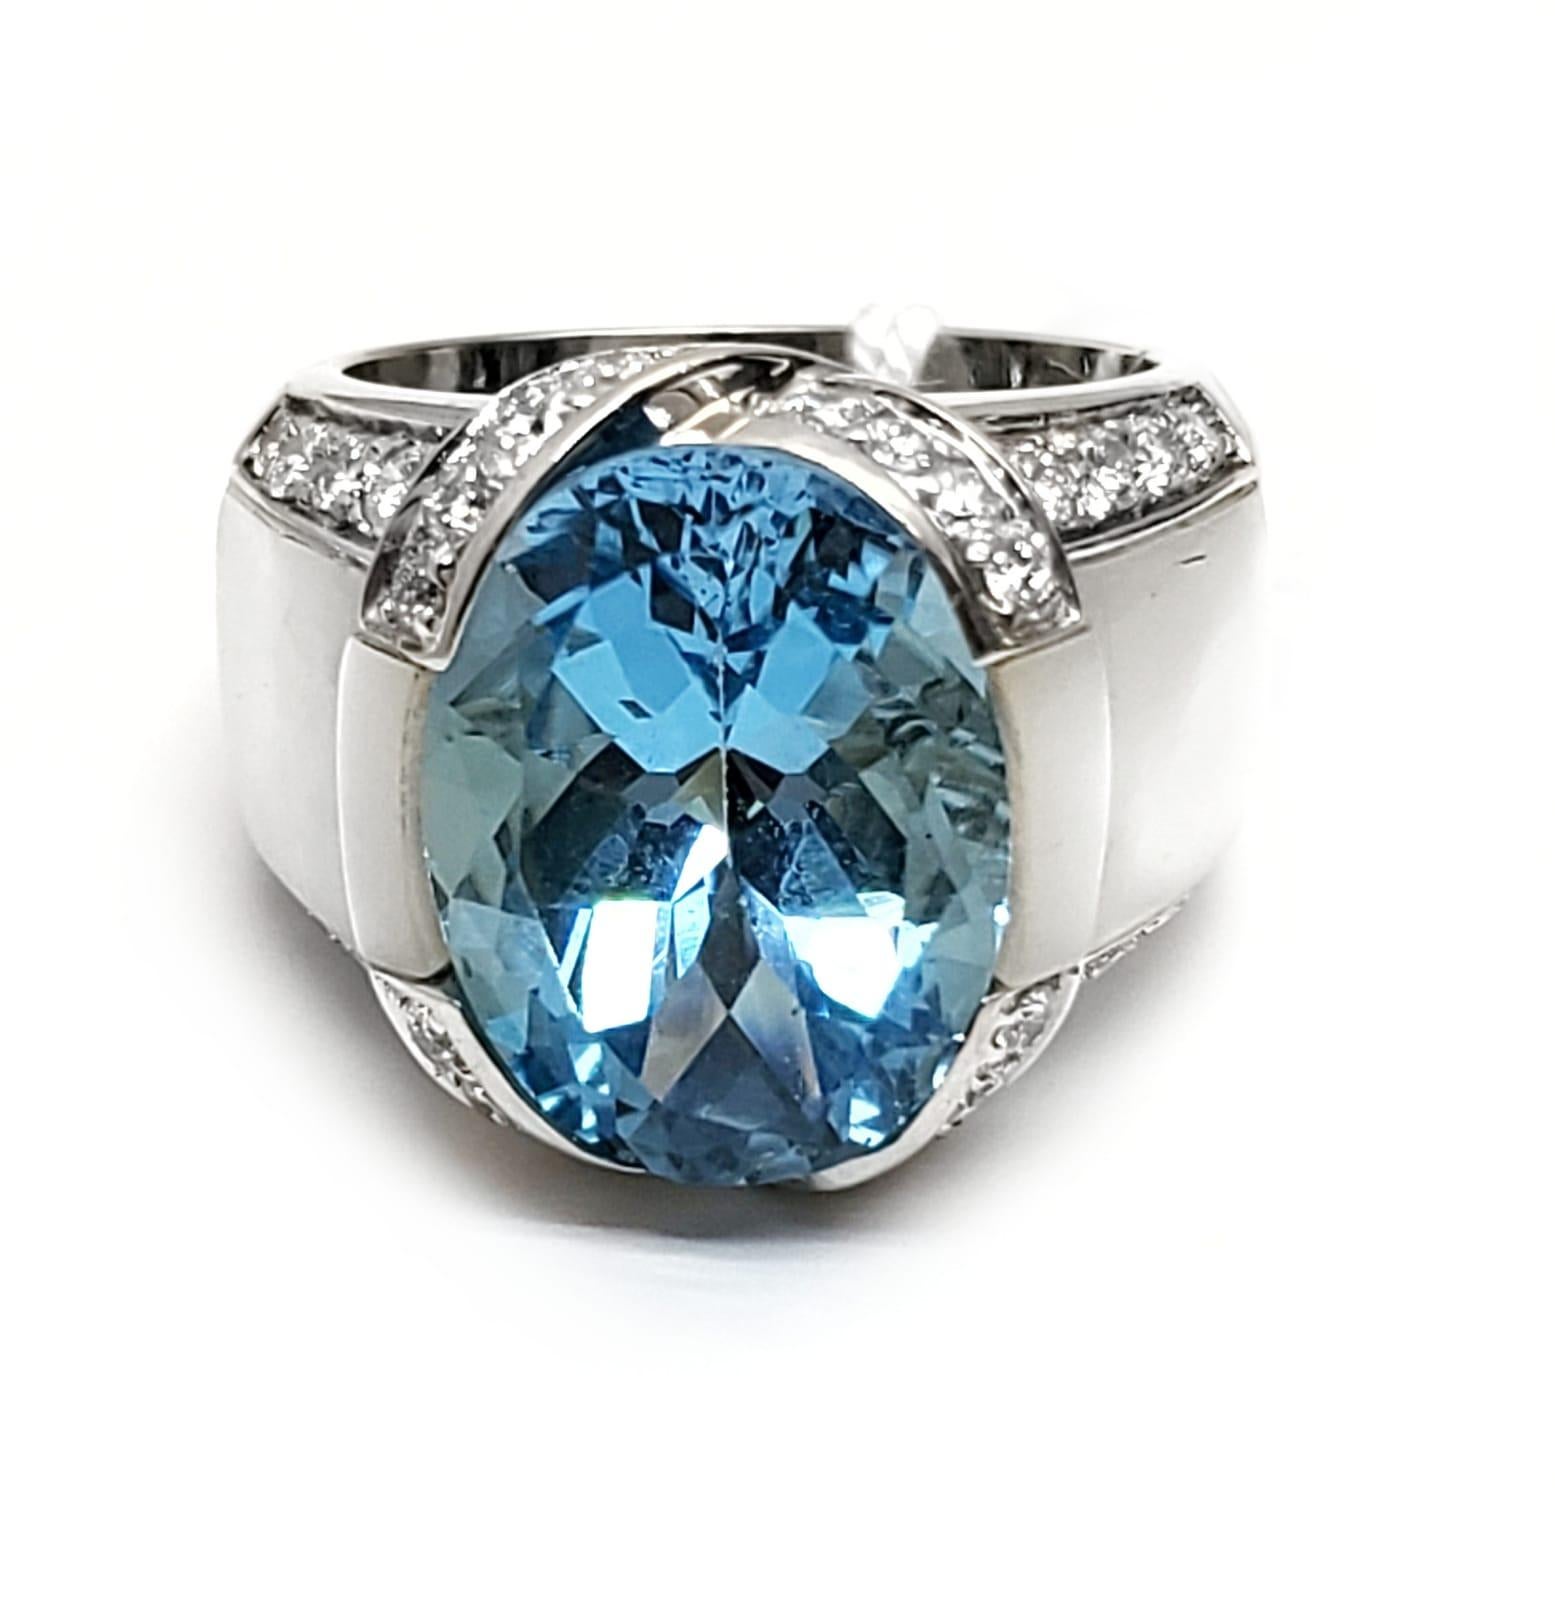 Andreoli Diamond Blue Topaz Mother of Pearl 18 Karat White Gold Ring

This ring features:
- 1.06 Carat Diamond
- 11.60 Carat Blue Topaz
- 1.05 Mother of Pearl
- 13.50 Gram 18K White Gold
- Made In Italy